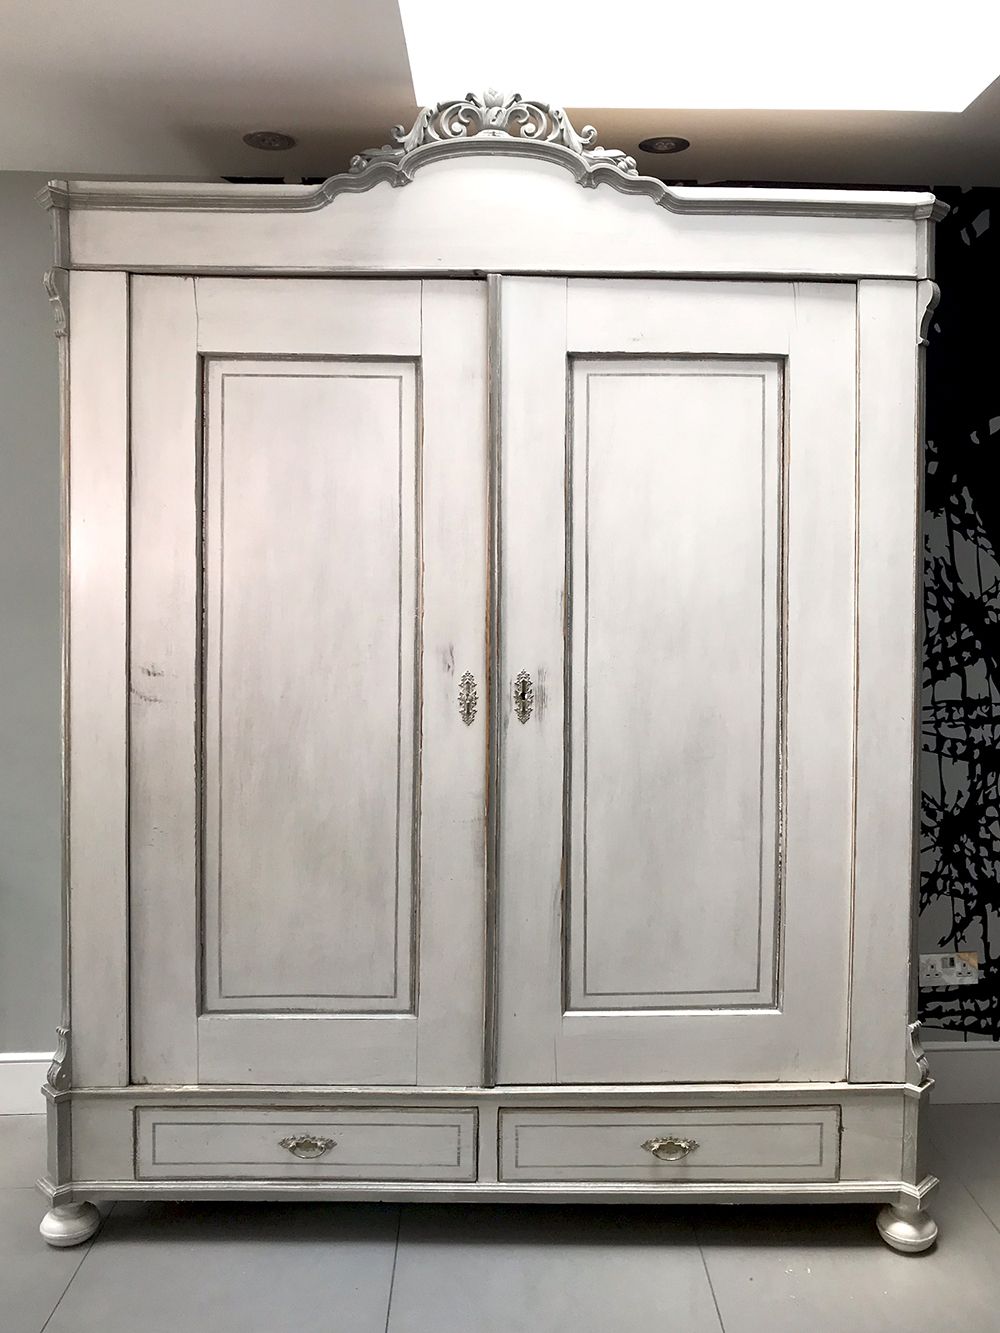 Antique French Painted Armoire – Sold | Napoleonrockefeller – Vintage And  Retro Furniture, Bespoke Hand Crafted Chairs And Seating With Armoire French Wardrobes (View 4 of 15)